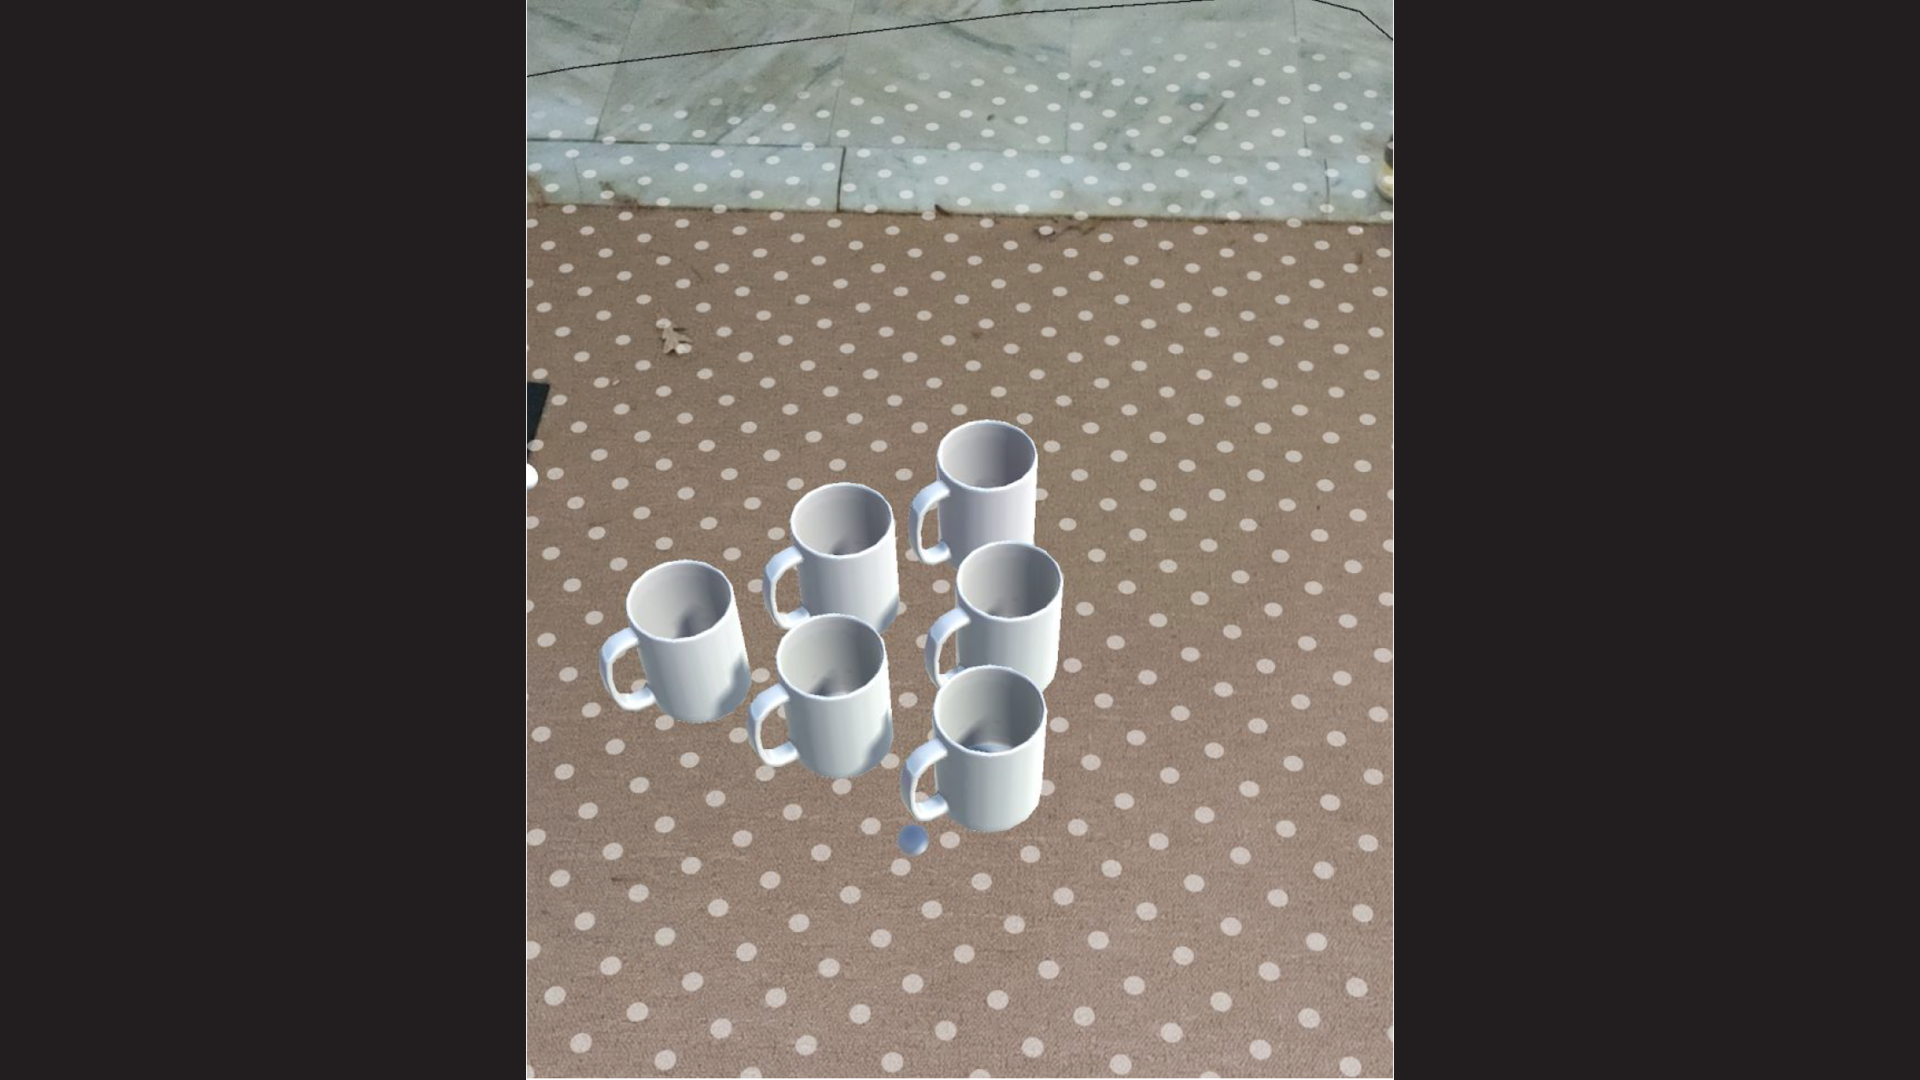 Tap to place cup formation